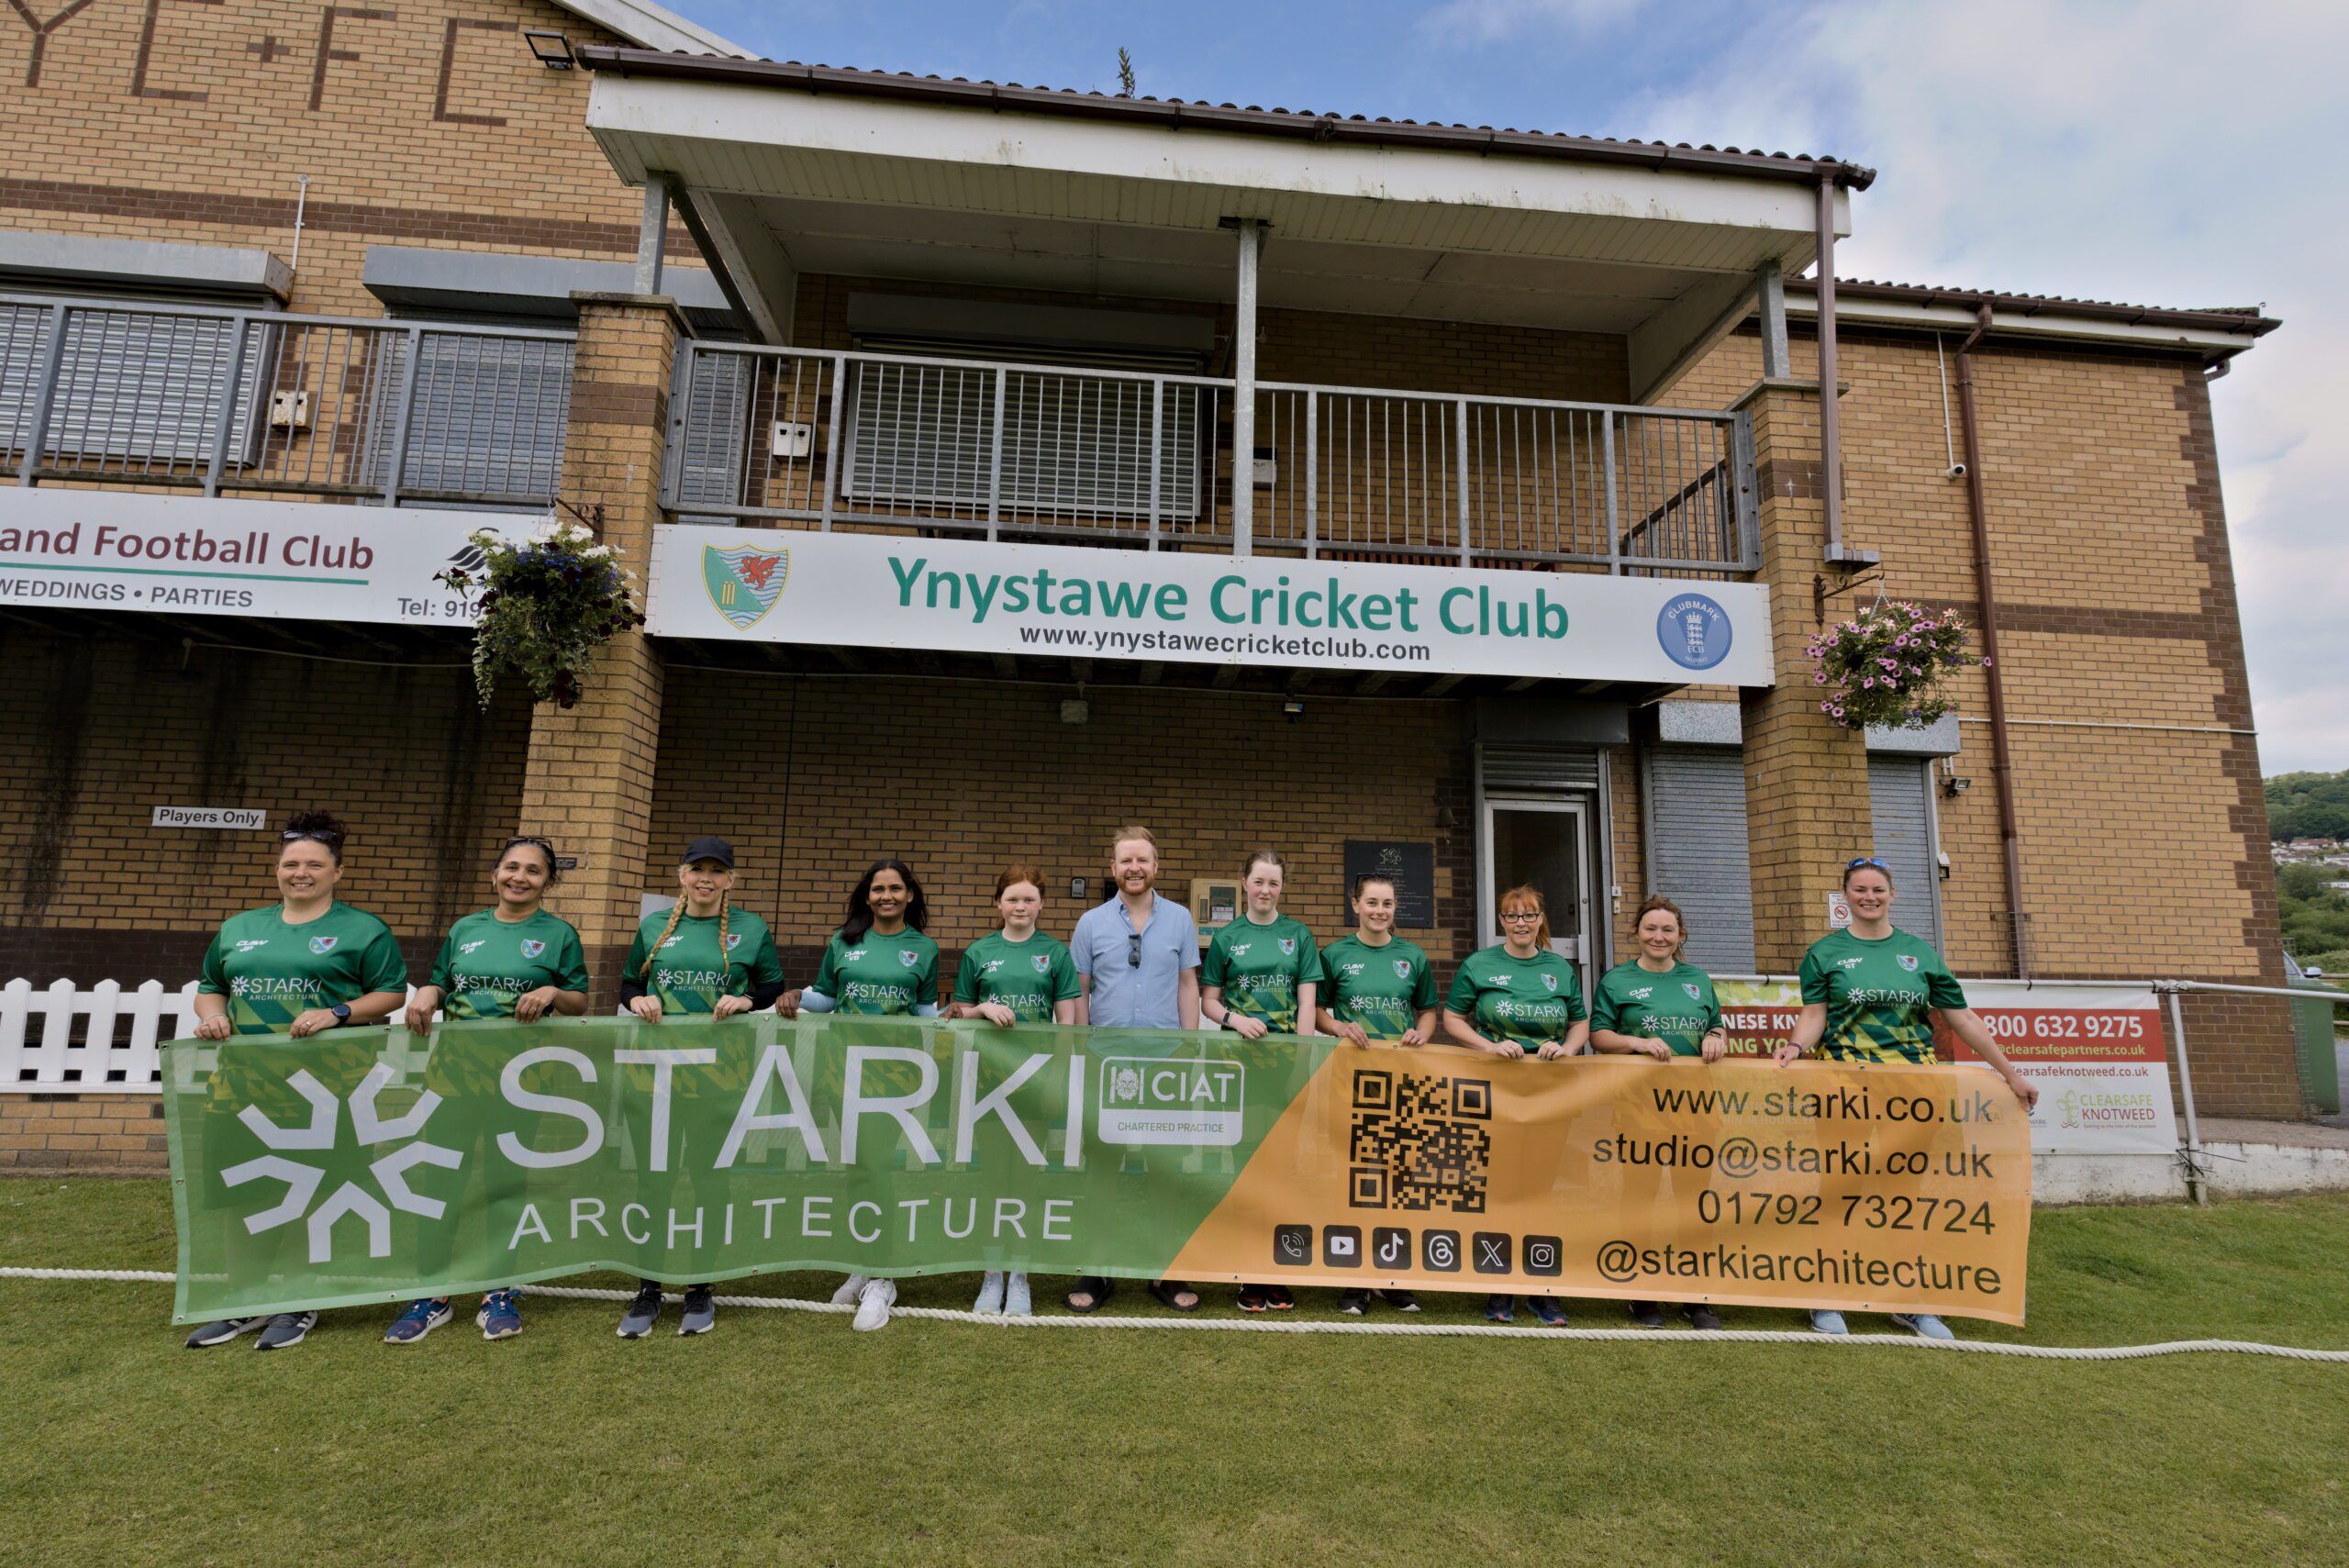 Chartered Architecture Firm Sponsors Ynystawe Cricket Club